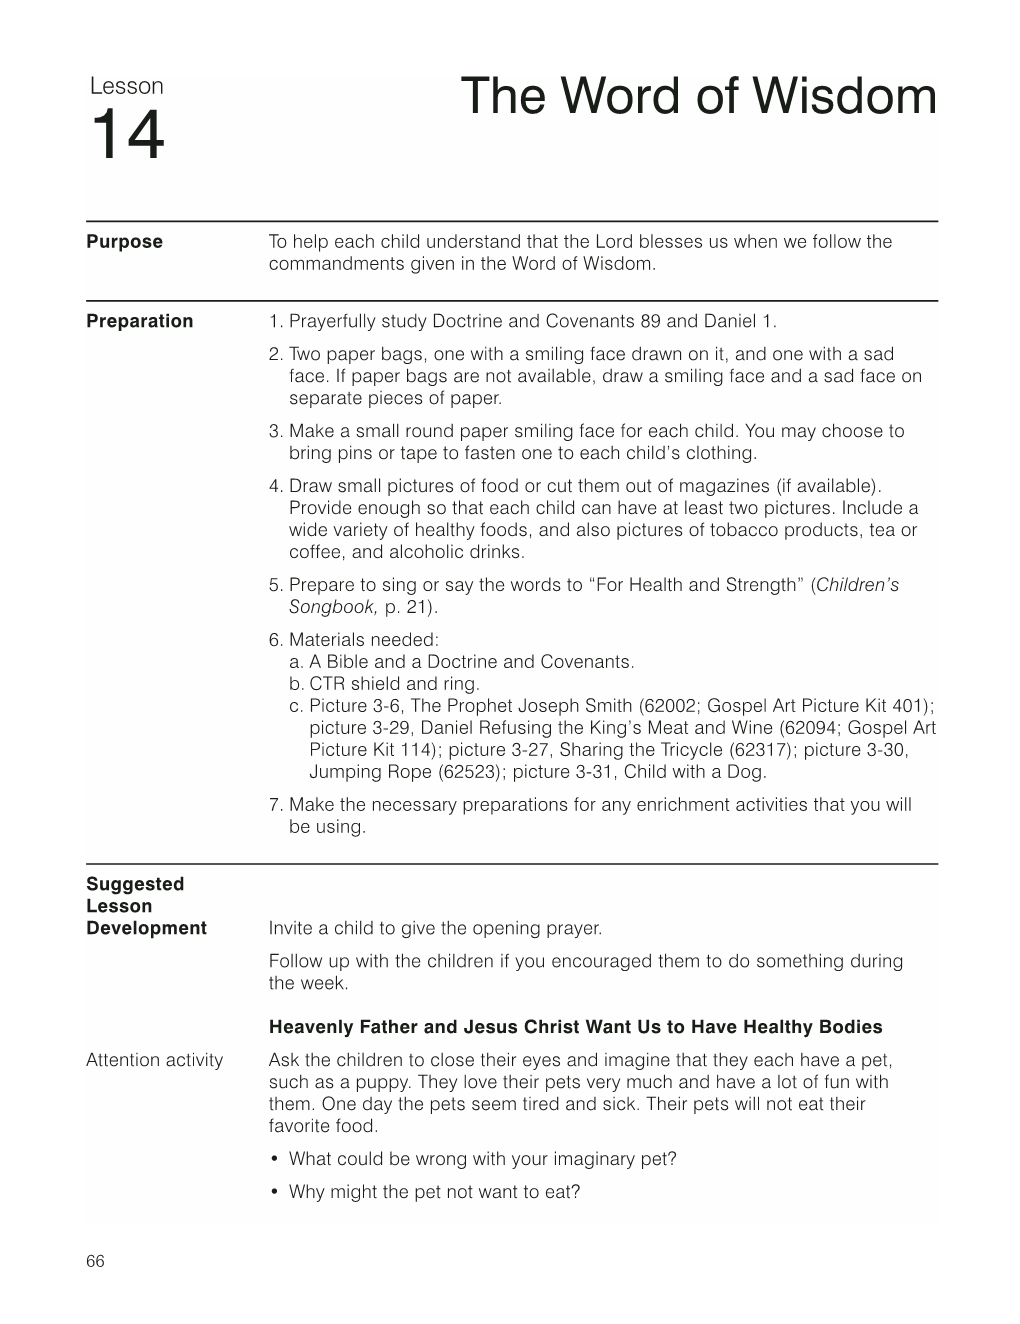 Primary 3 Manual